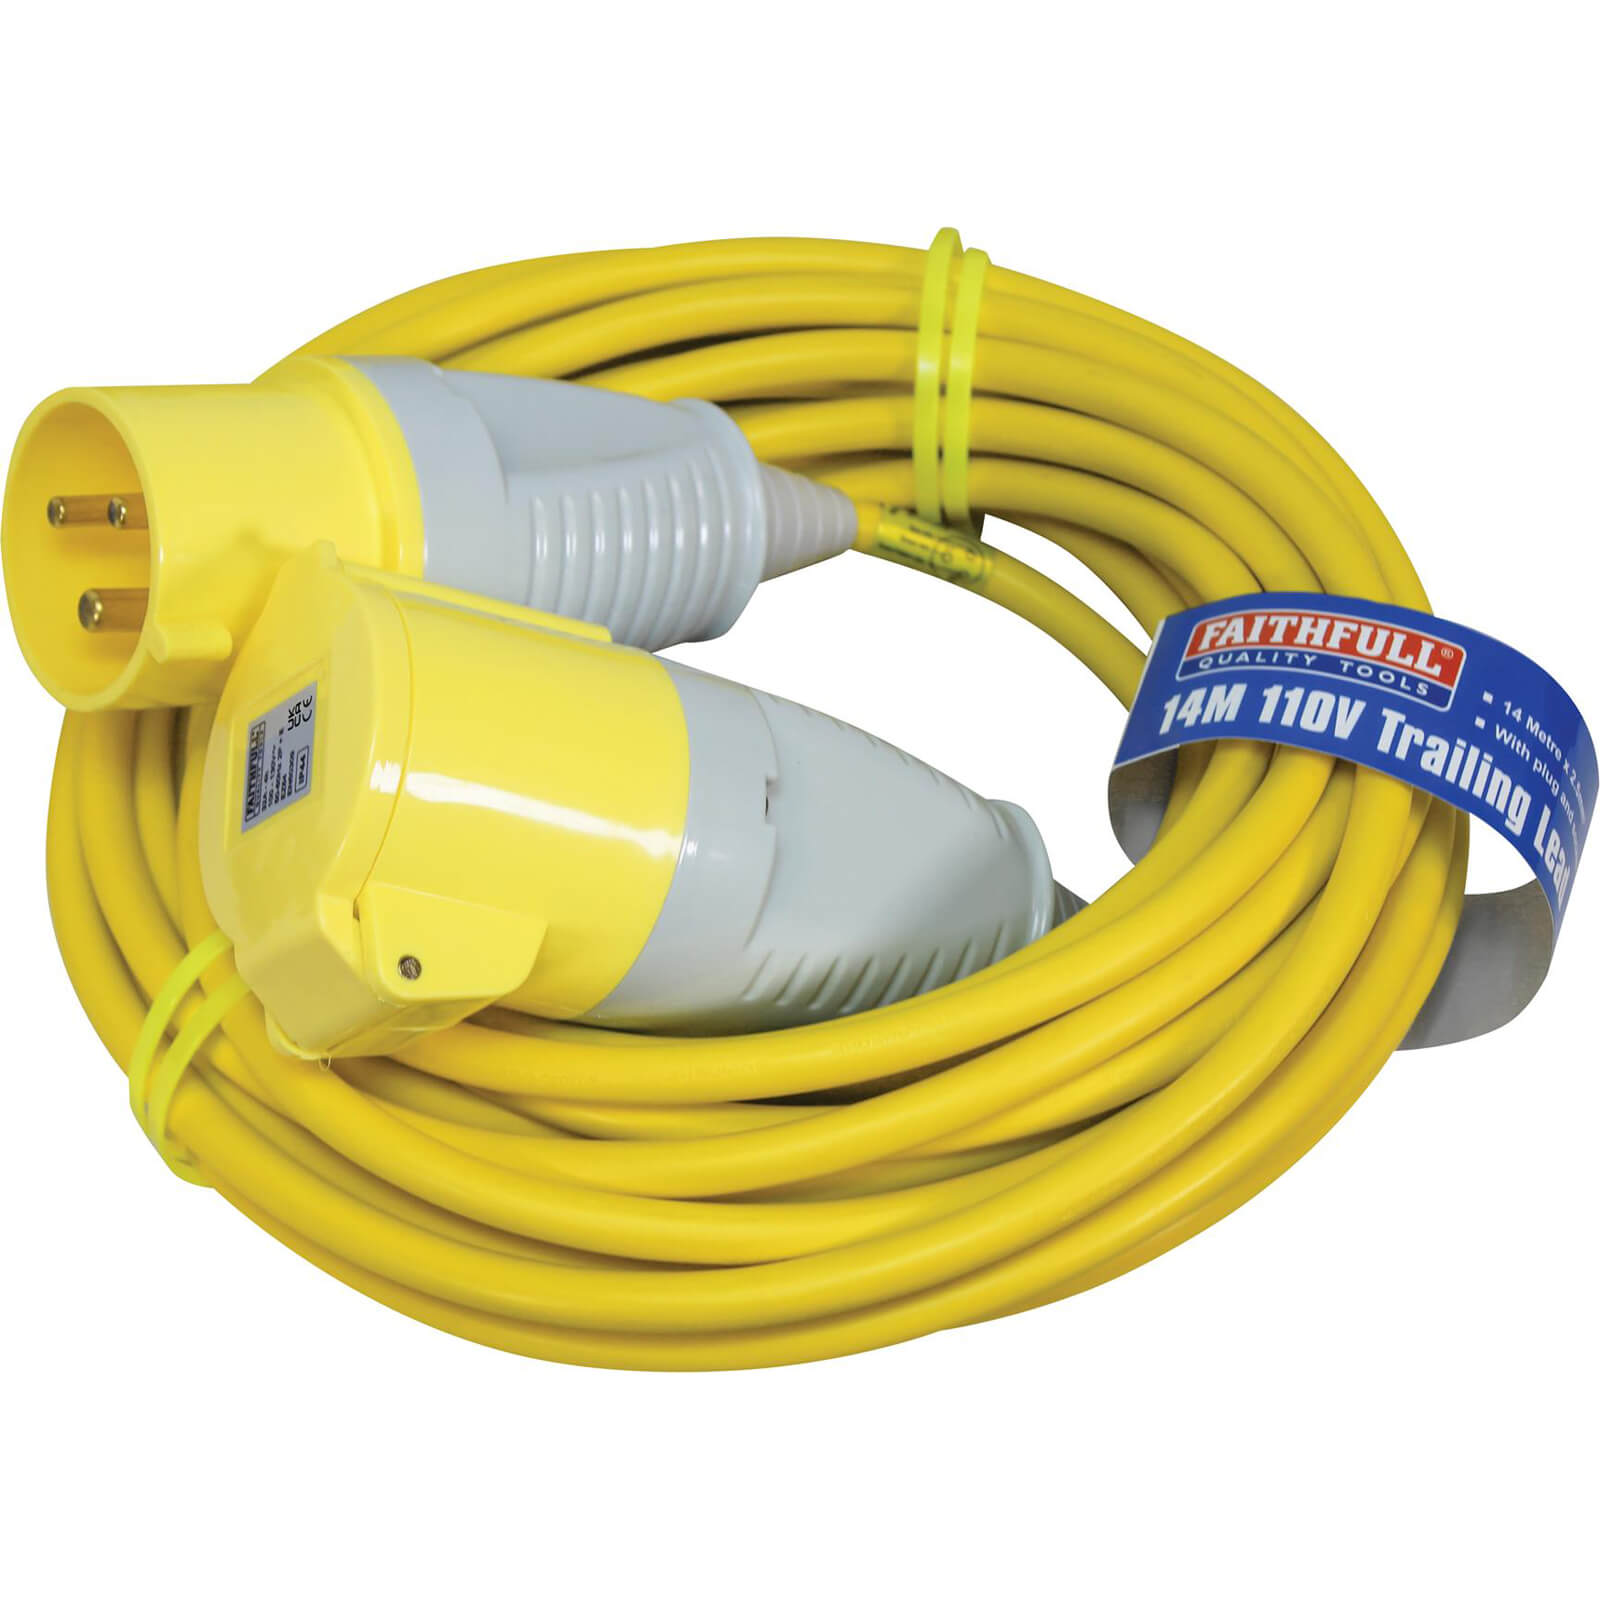 Sirius Extension Trailing Lead 16 amp Heavy Duty Yellow Cable 110v